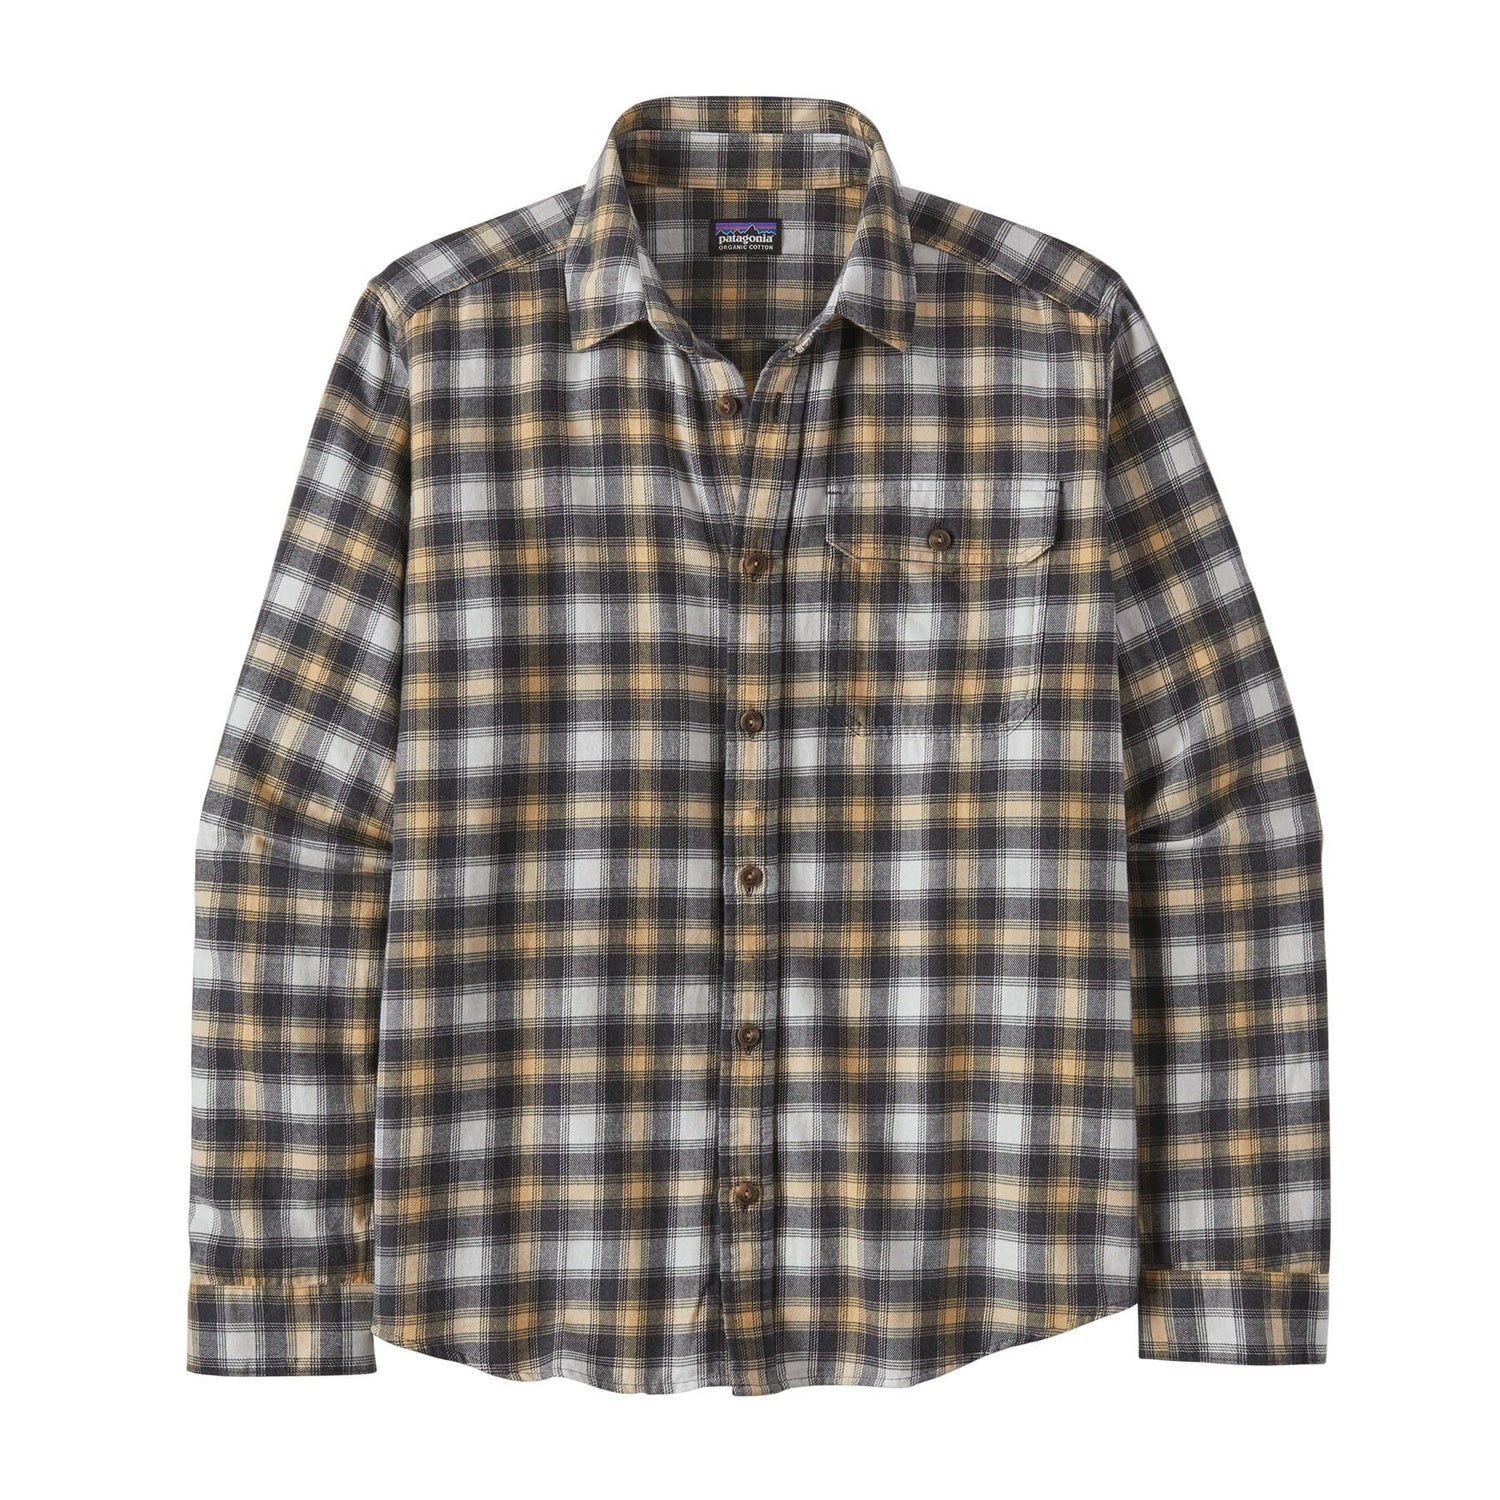 Patagonia M's L/S Cotton in Conversion LW Fjord Flannel Shirt - 100% Cotton in Conversion Beach Day: Sandy Melon Shirt